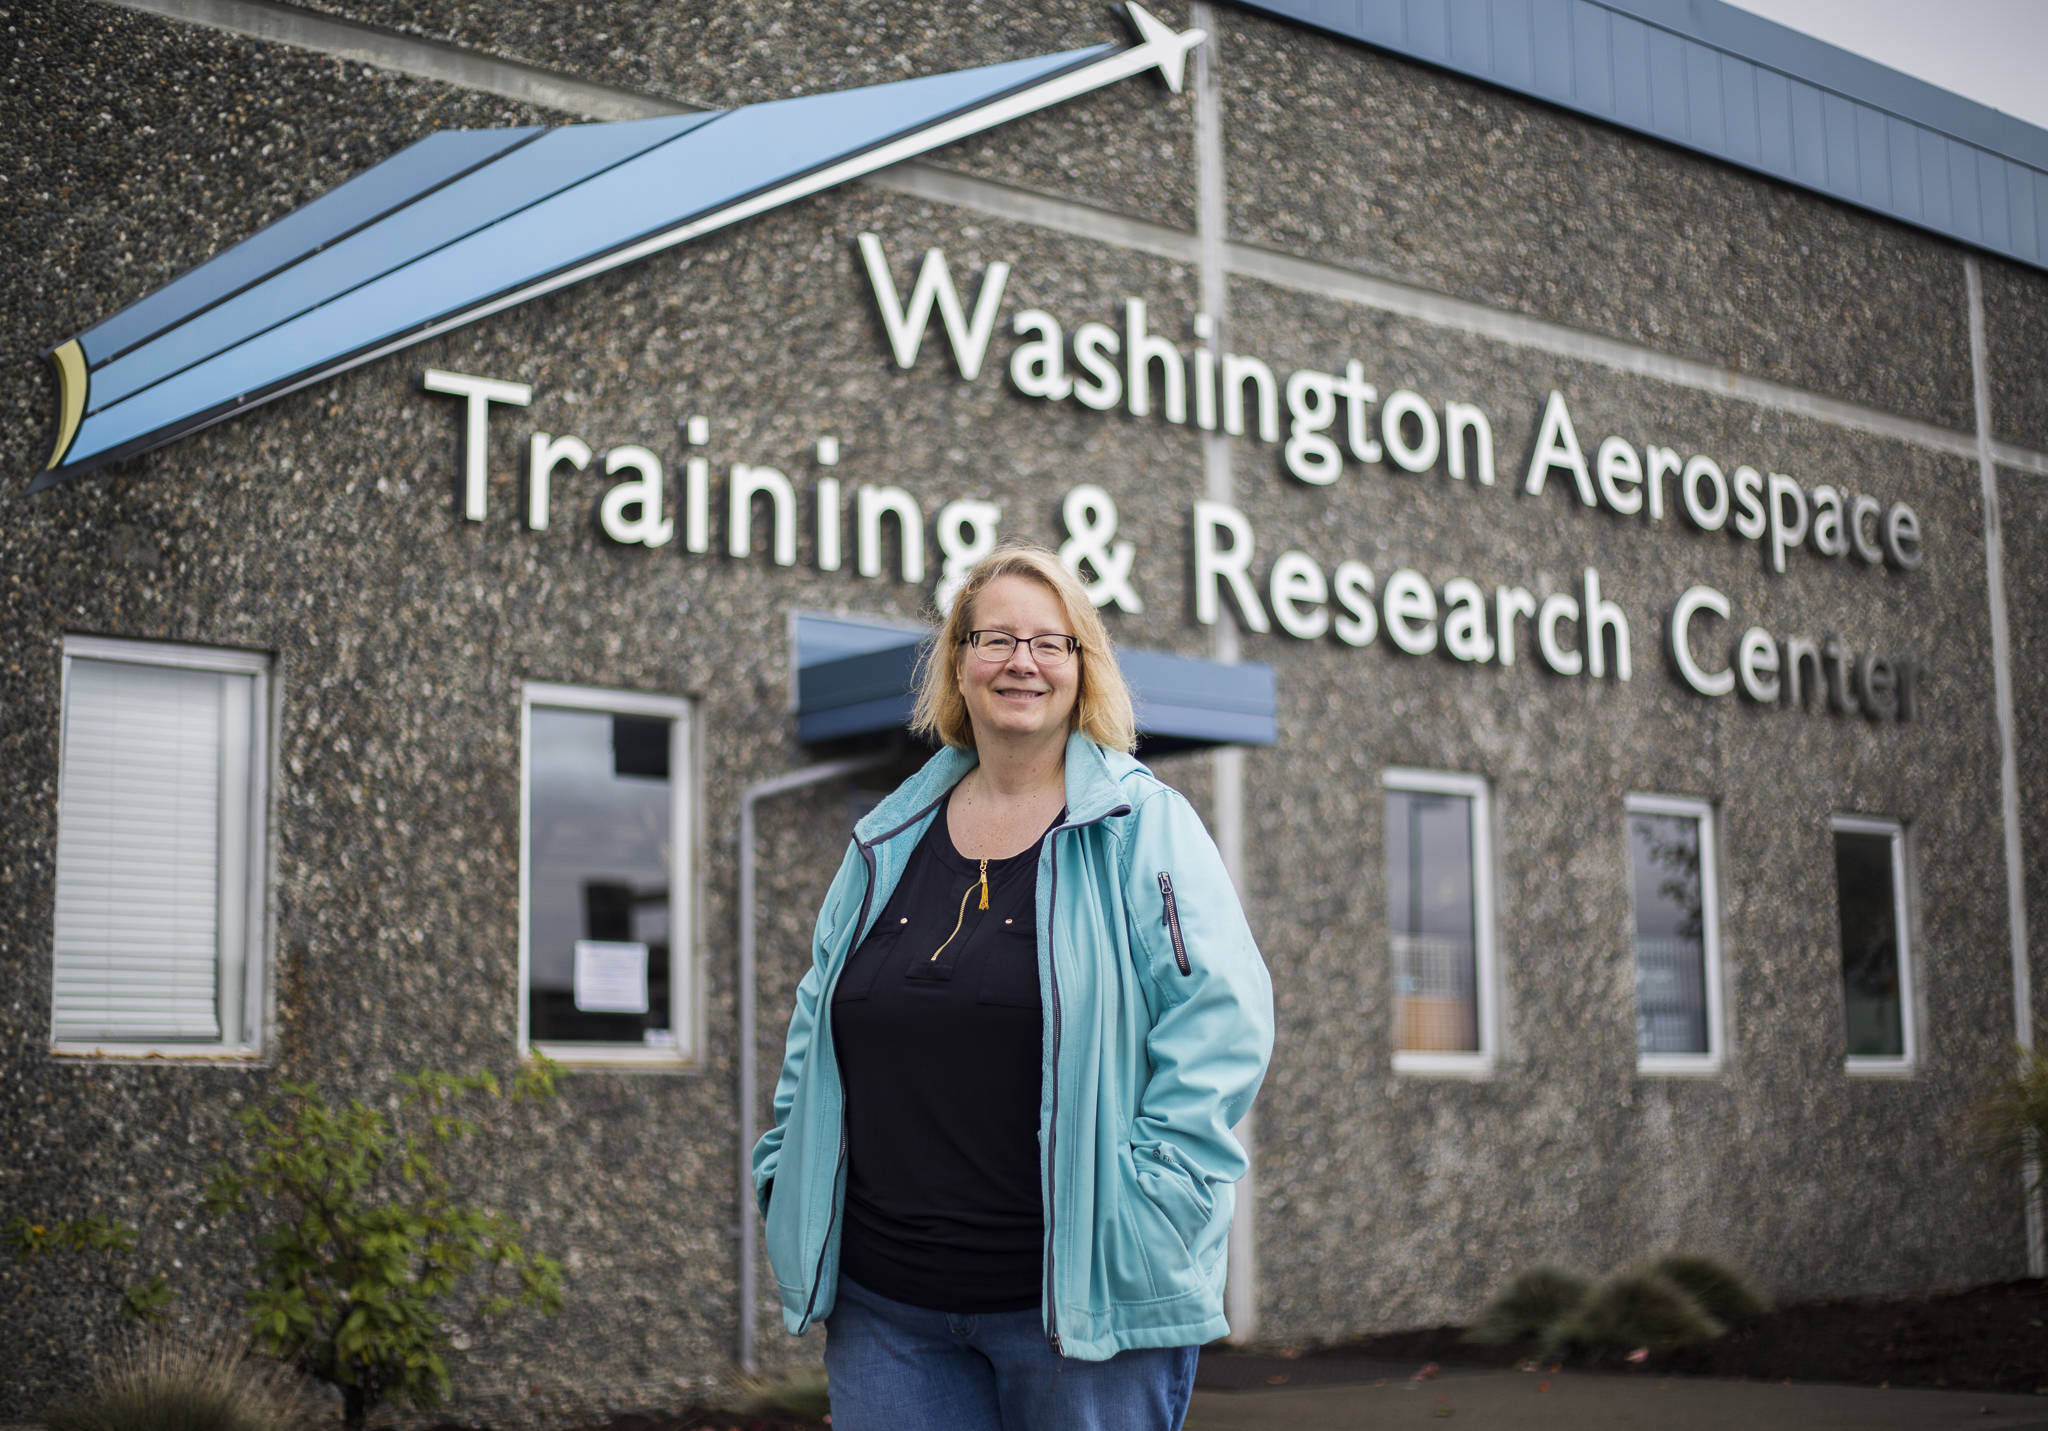 Melanie Evans stands outside the Washington Aerospace Training Research Center in Everett, where she received her Quality Assurance Certificate. (Olivia Vanni / The Herald)